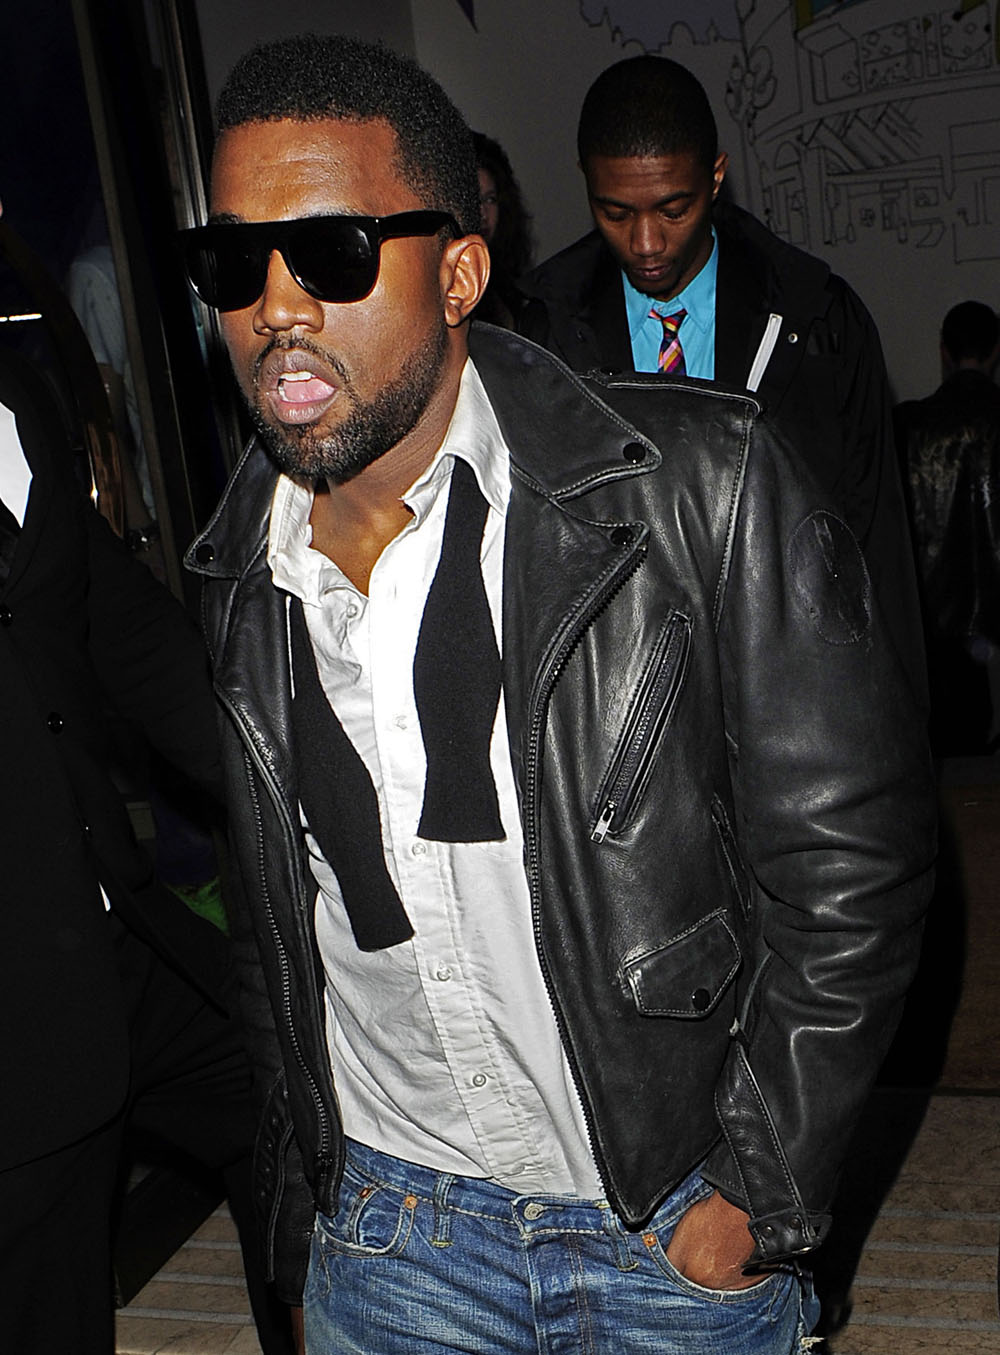 The Kanye West Foundation Officially Shut Down